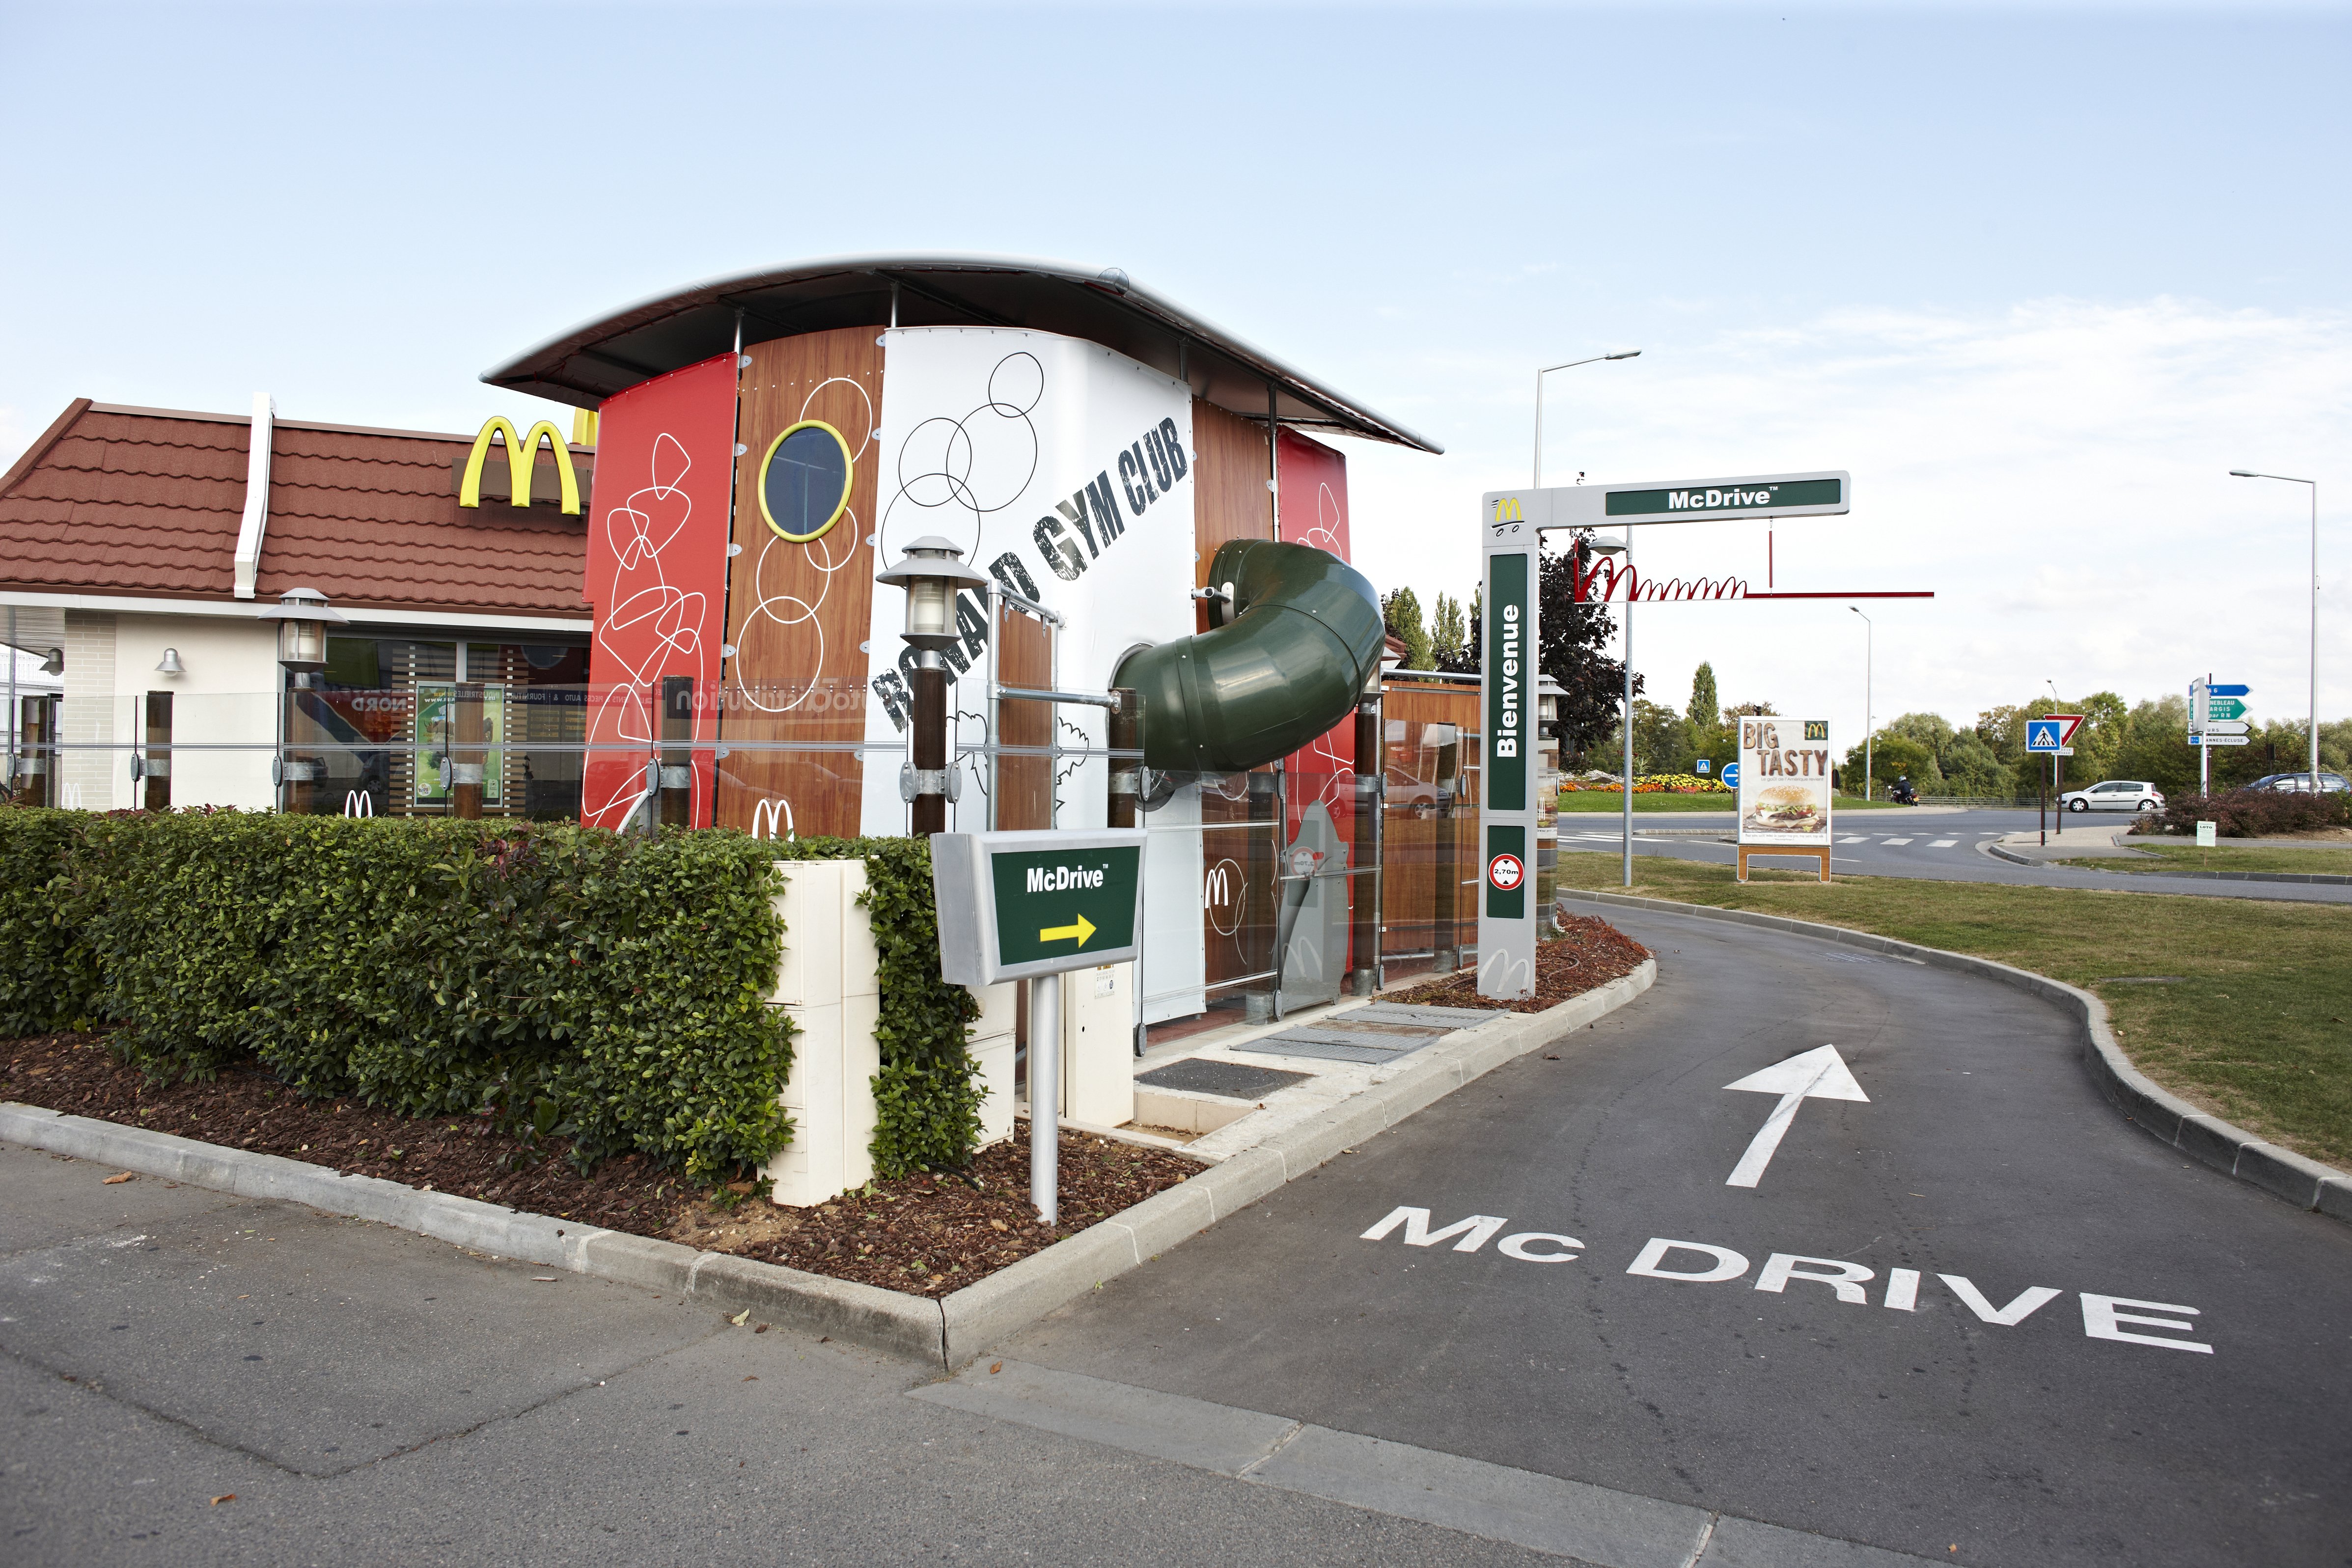 McDrive has the priority. If you order in McDrive and a friend inside you'll get your food first.